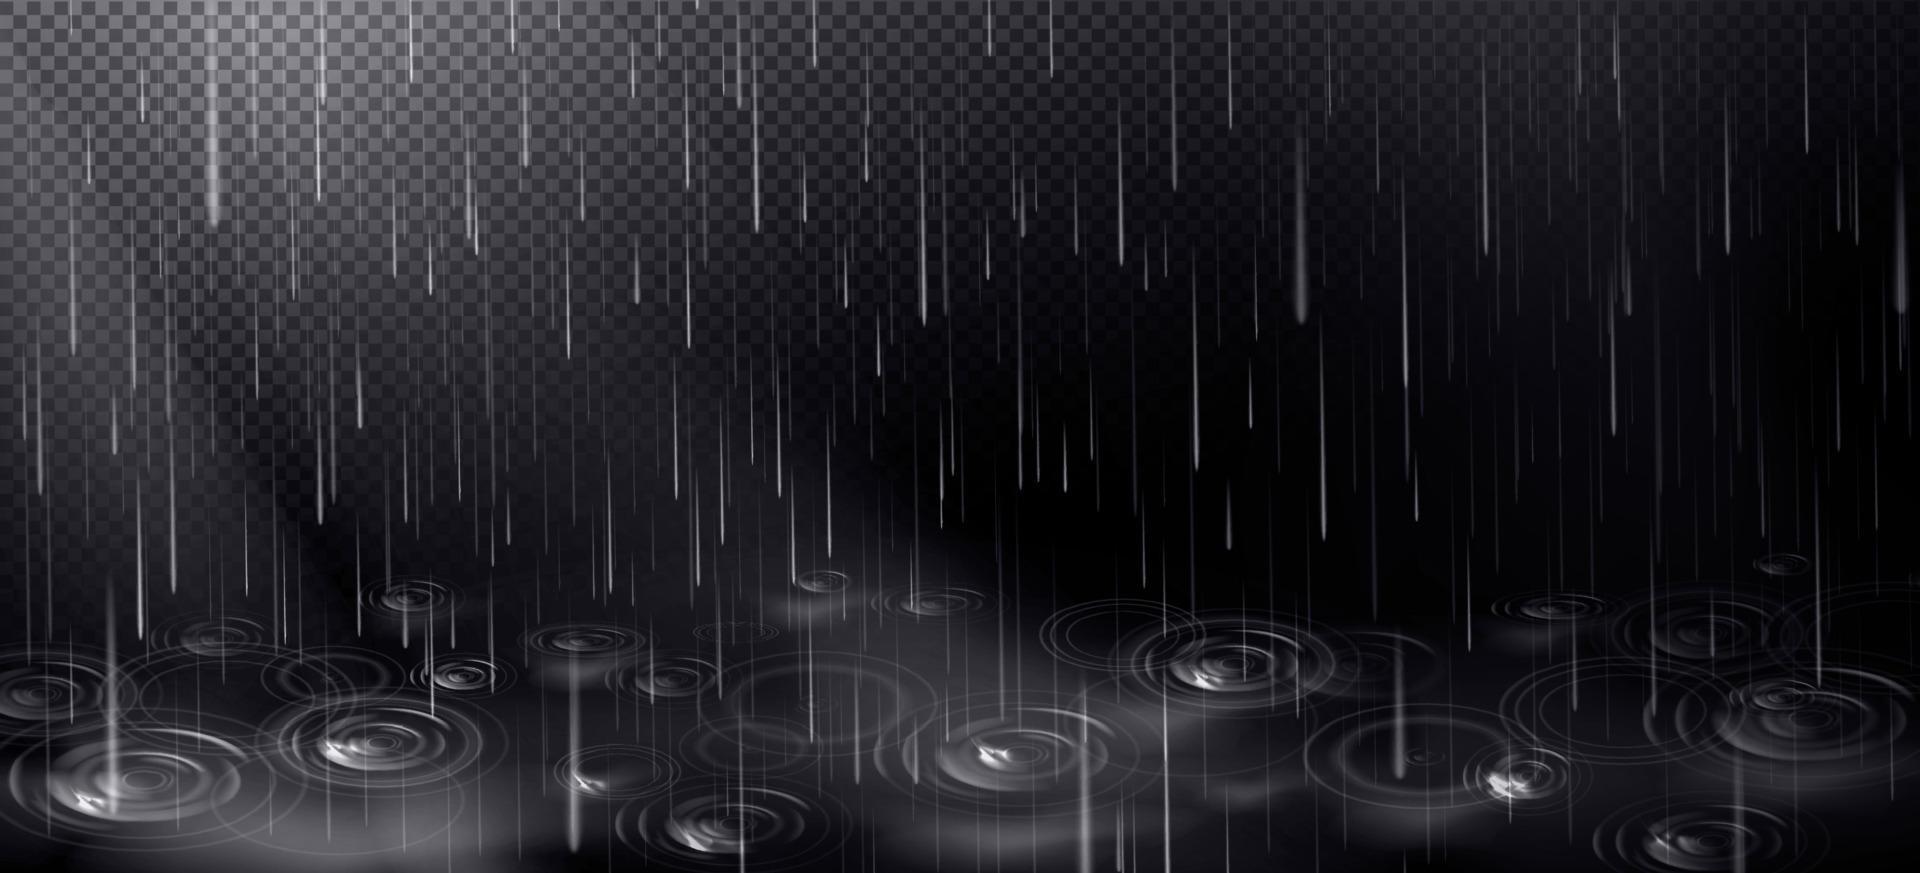 Rain and puddle with circles from falling drops vector